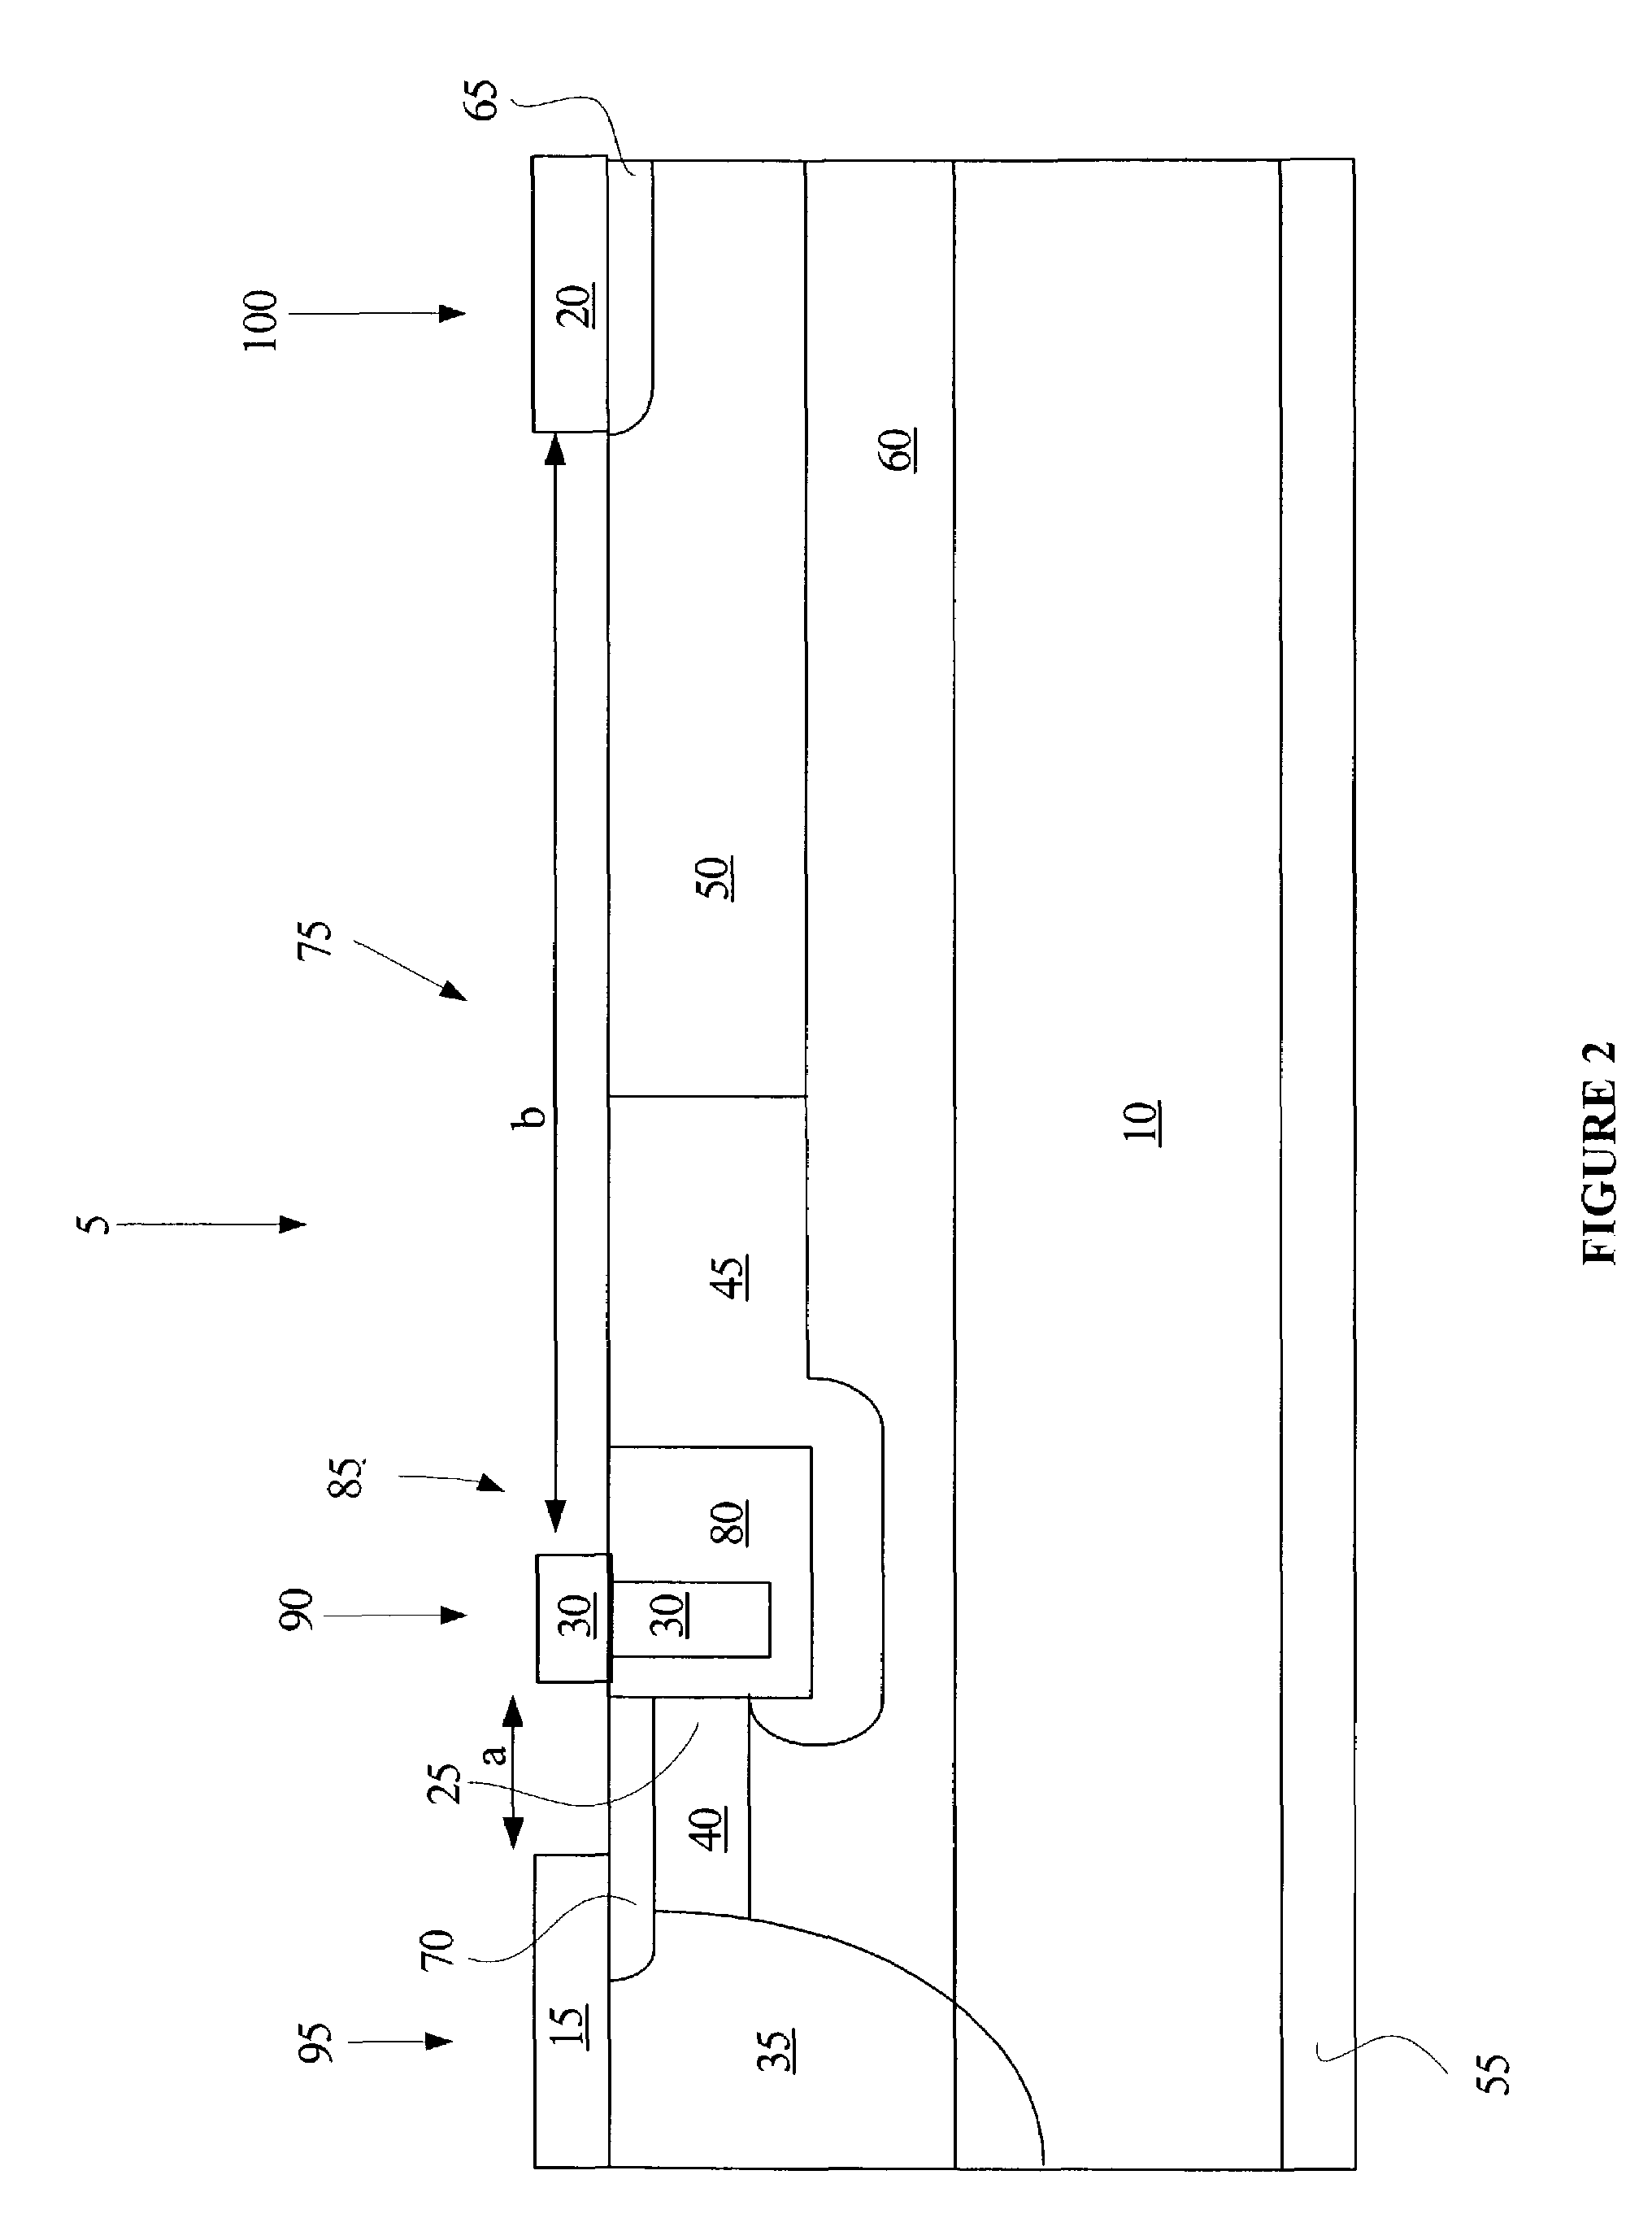 Trench gate laterally diffused MOSFET devices and methods for making such devices